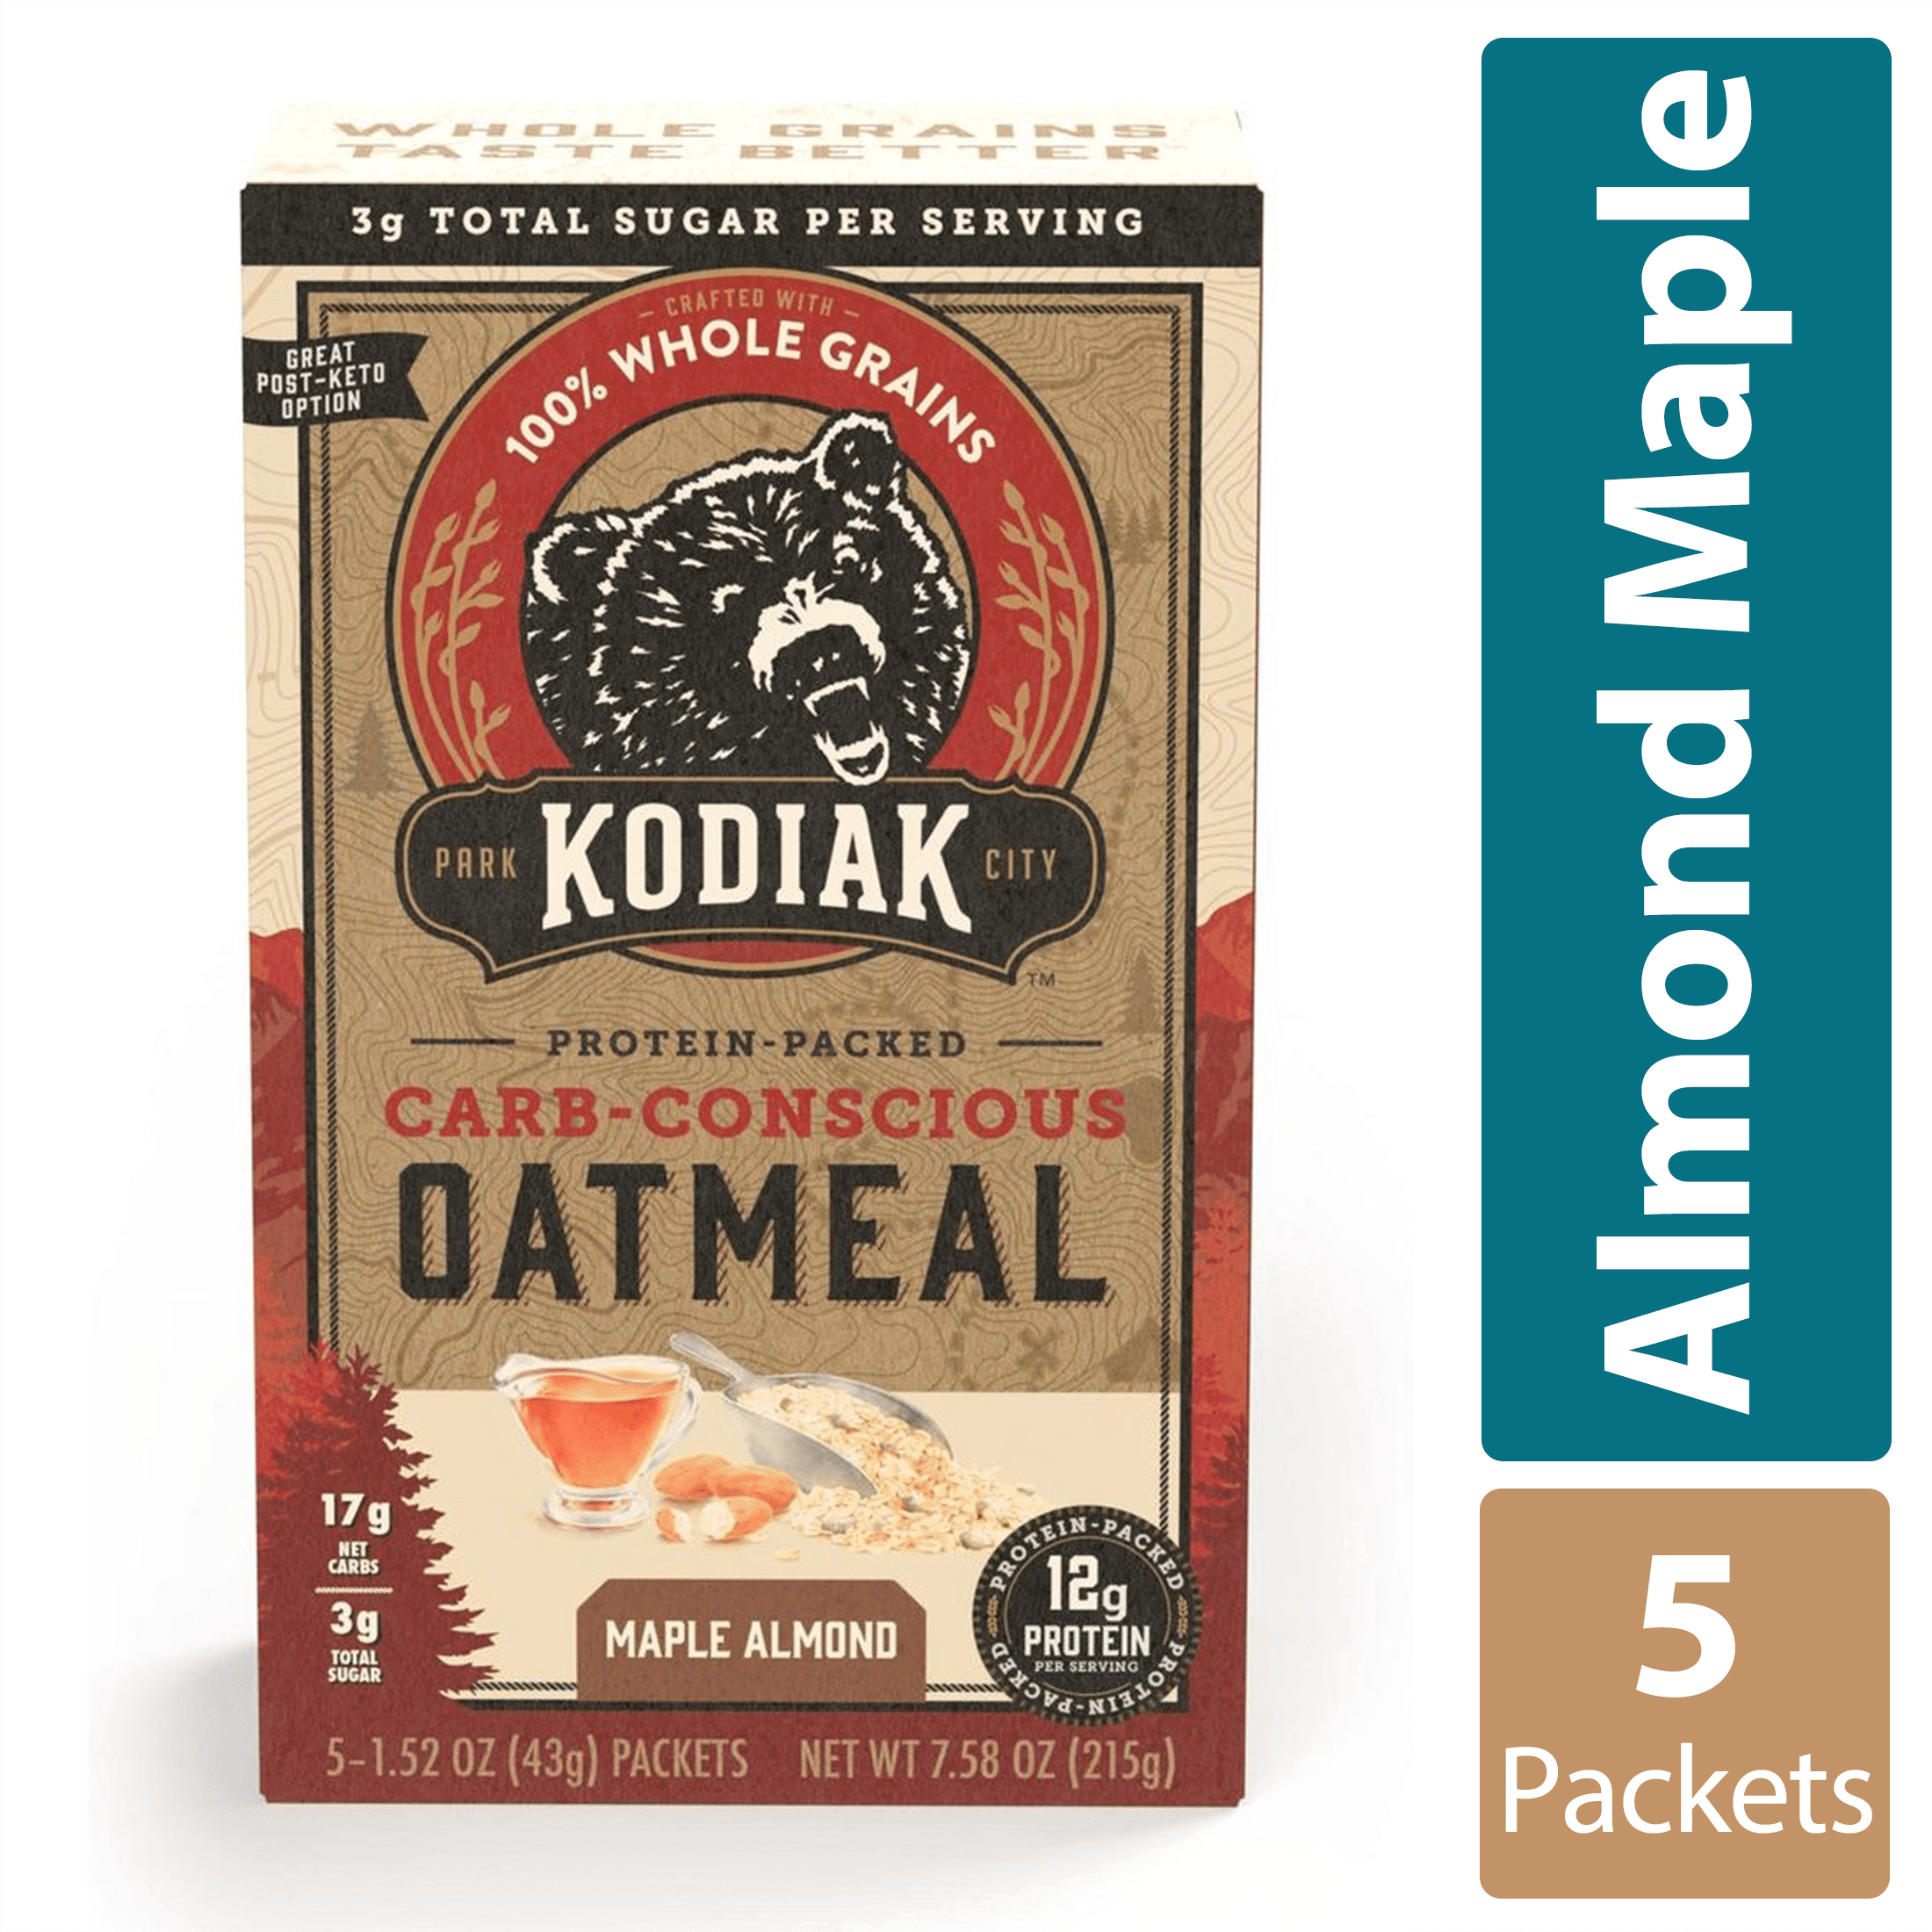 Kodiak Protein-Packed Carb-Conscious Maple Almond Instant Oatmeal, 1.52 oz, 5 Packets